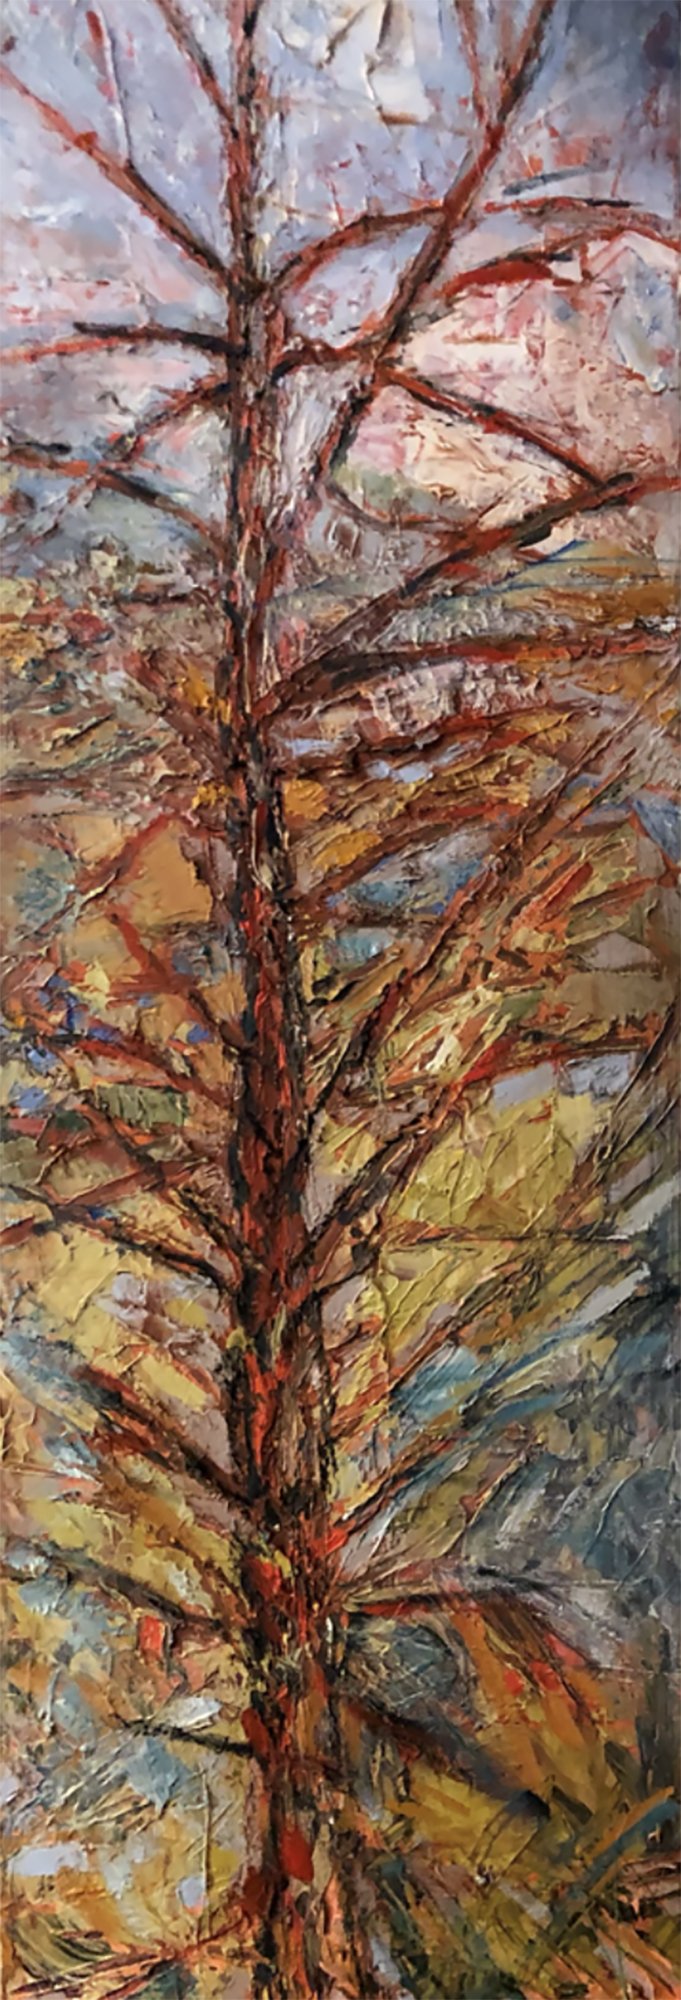   Layers of Life    48" x 12"   Oil on canvas 